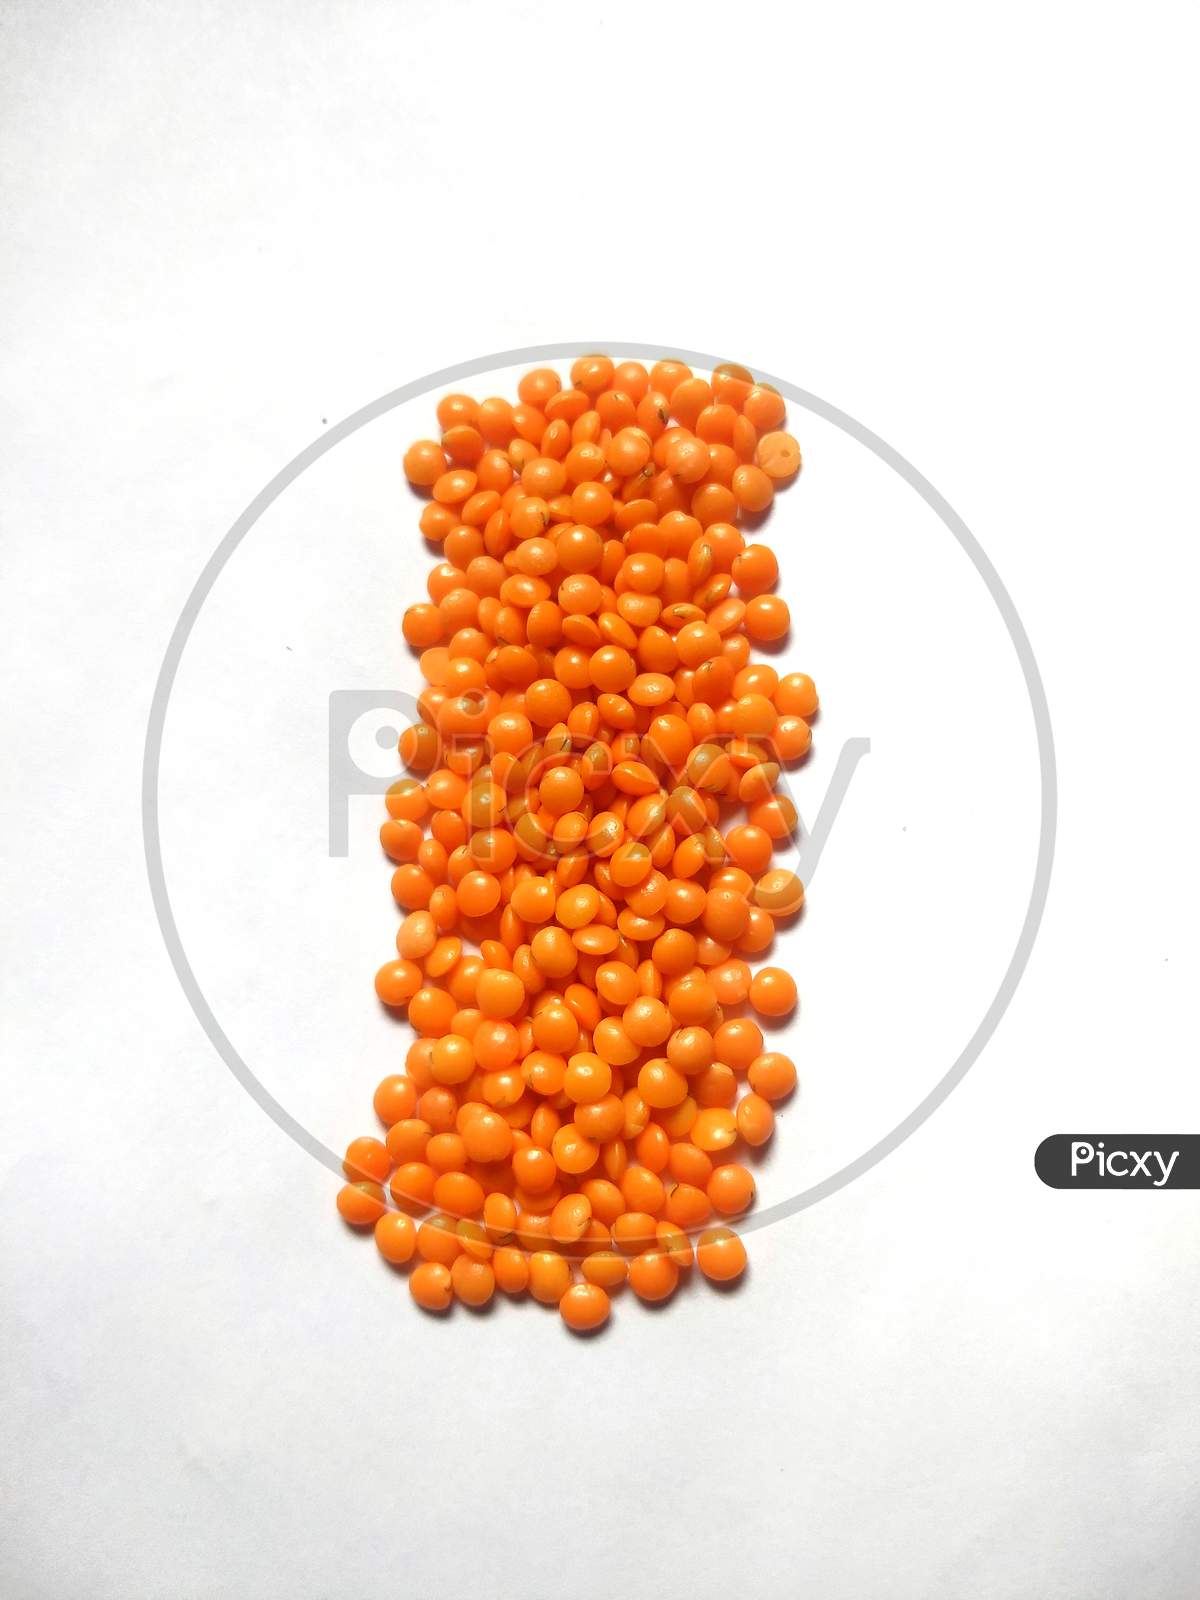 Red lentils or Masoor dal in white background